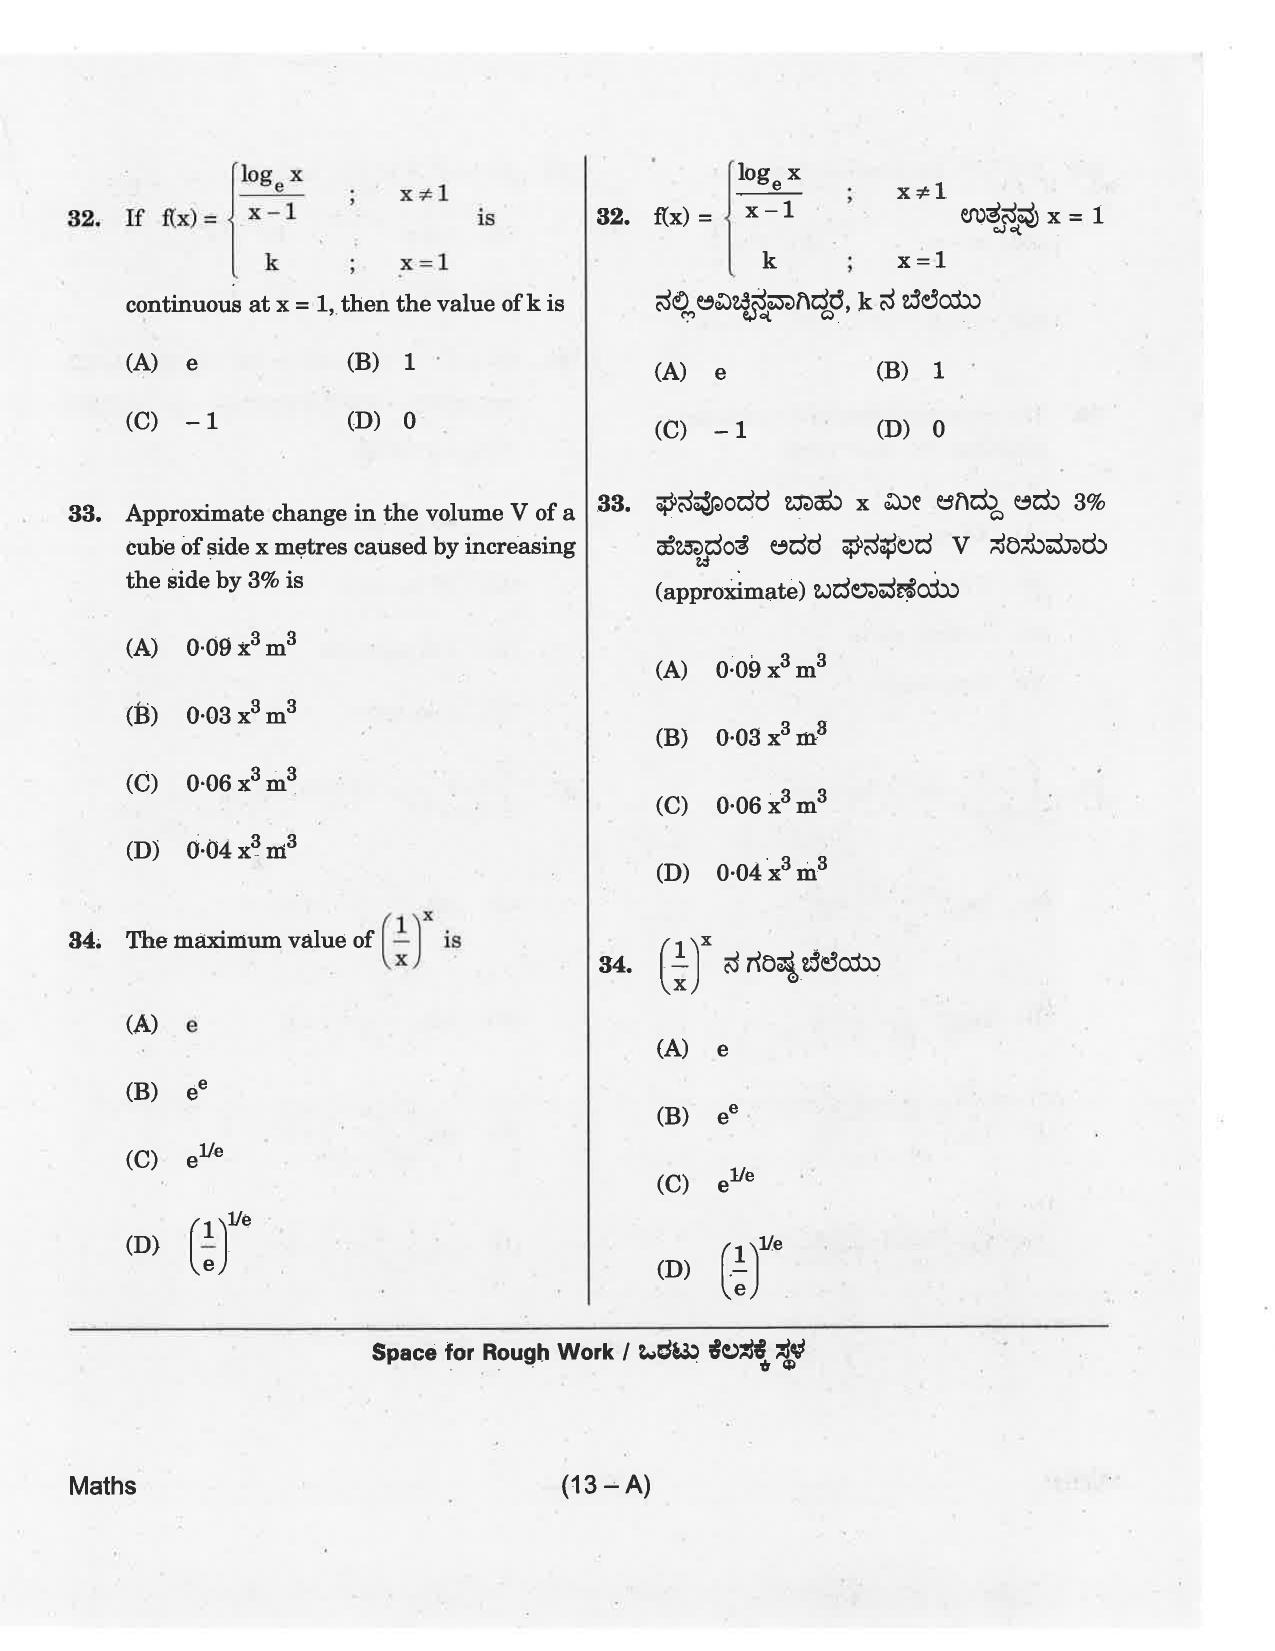 KCET Mathematics 2018 Question Papers - Page 13